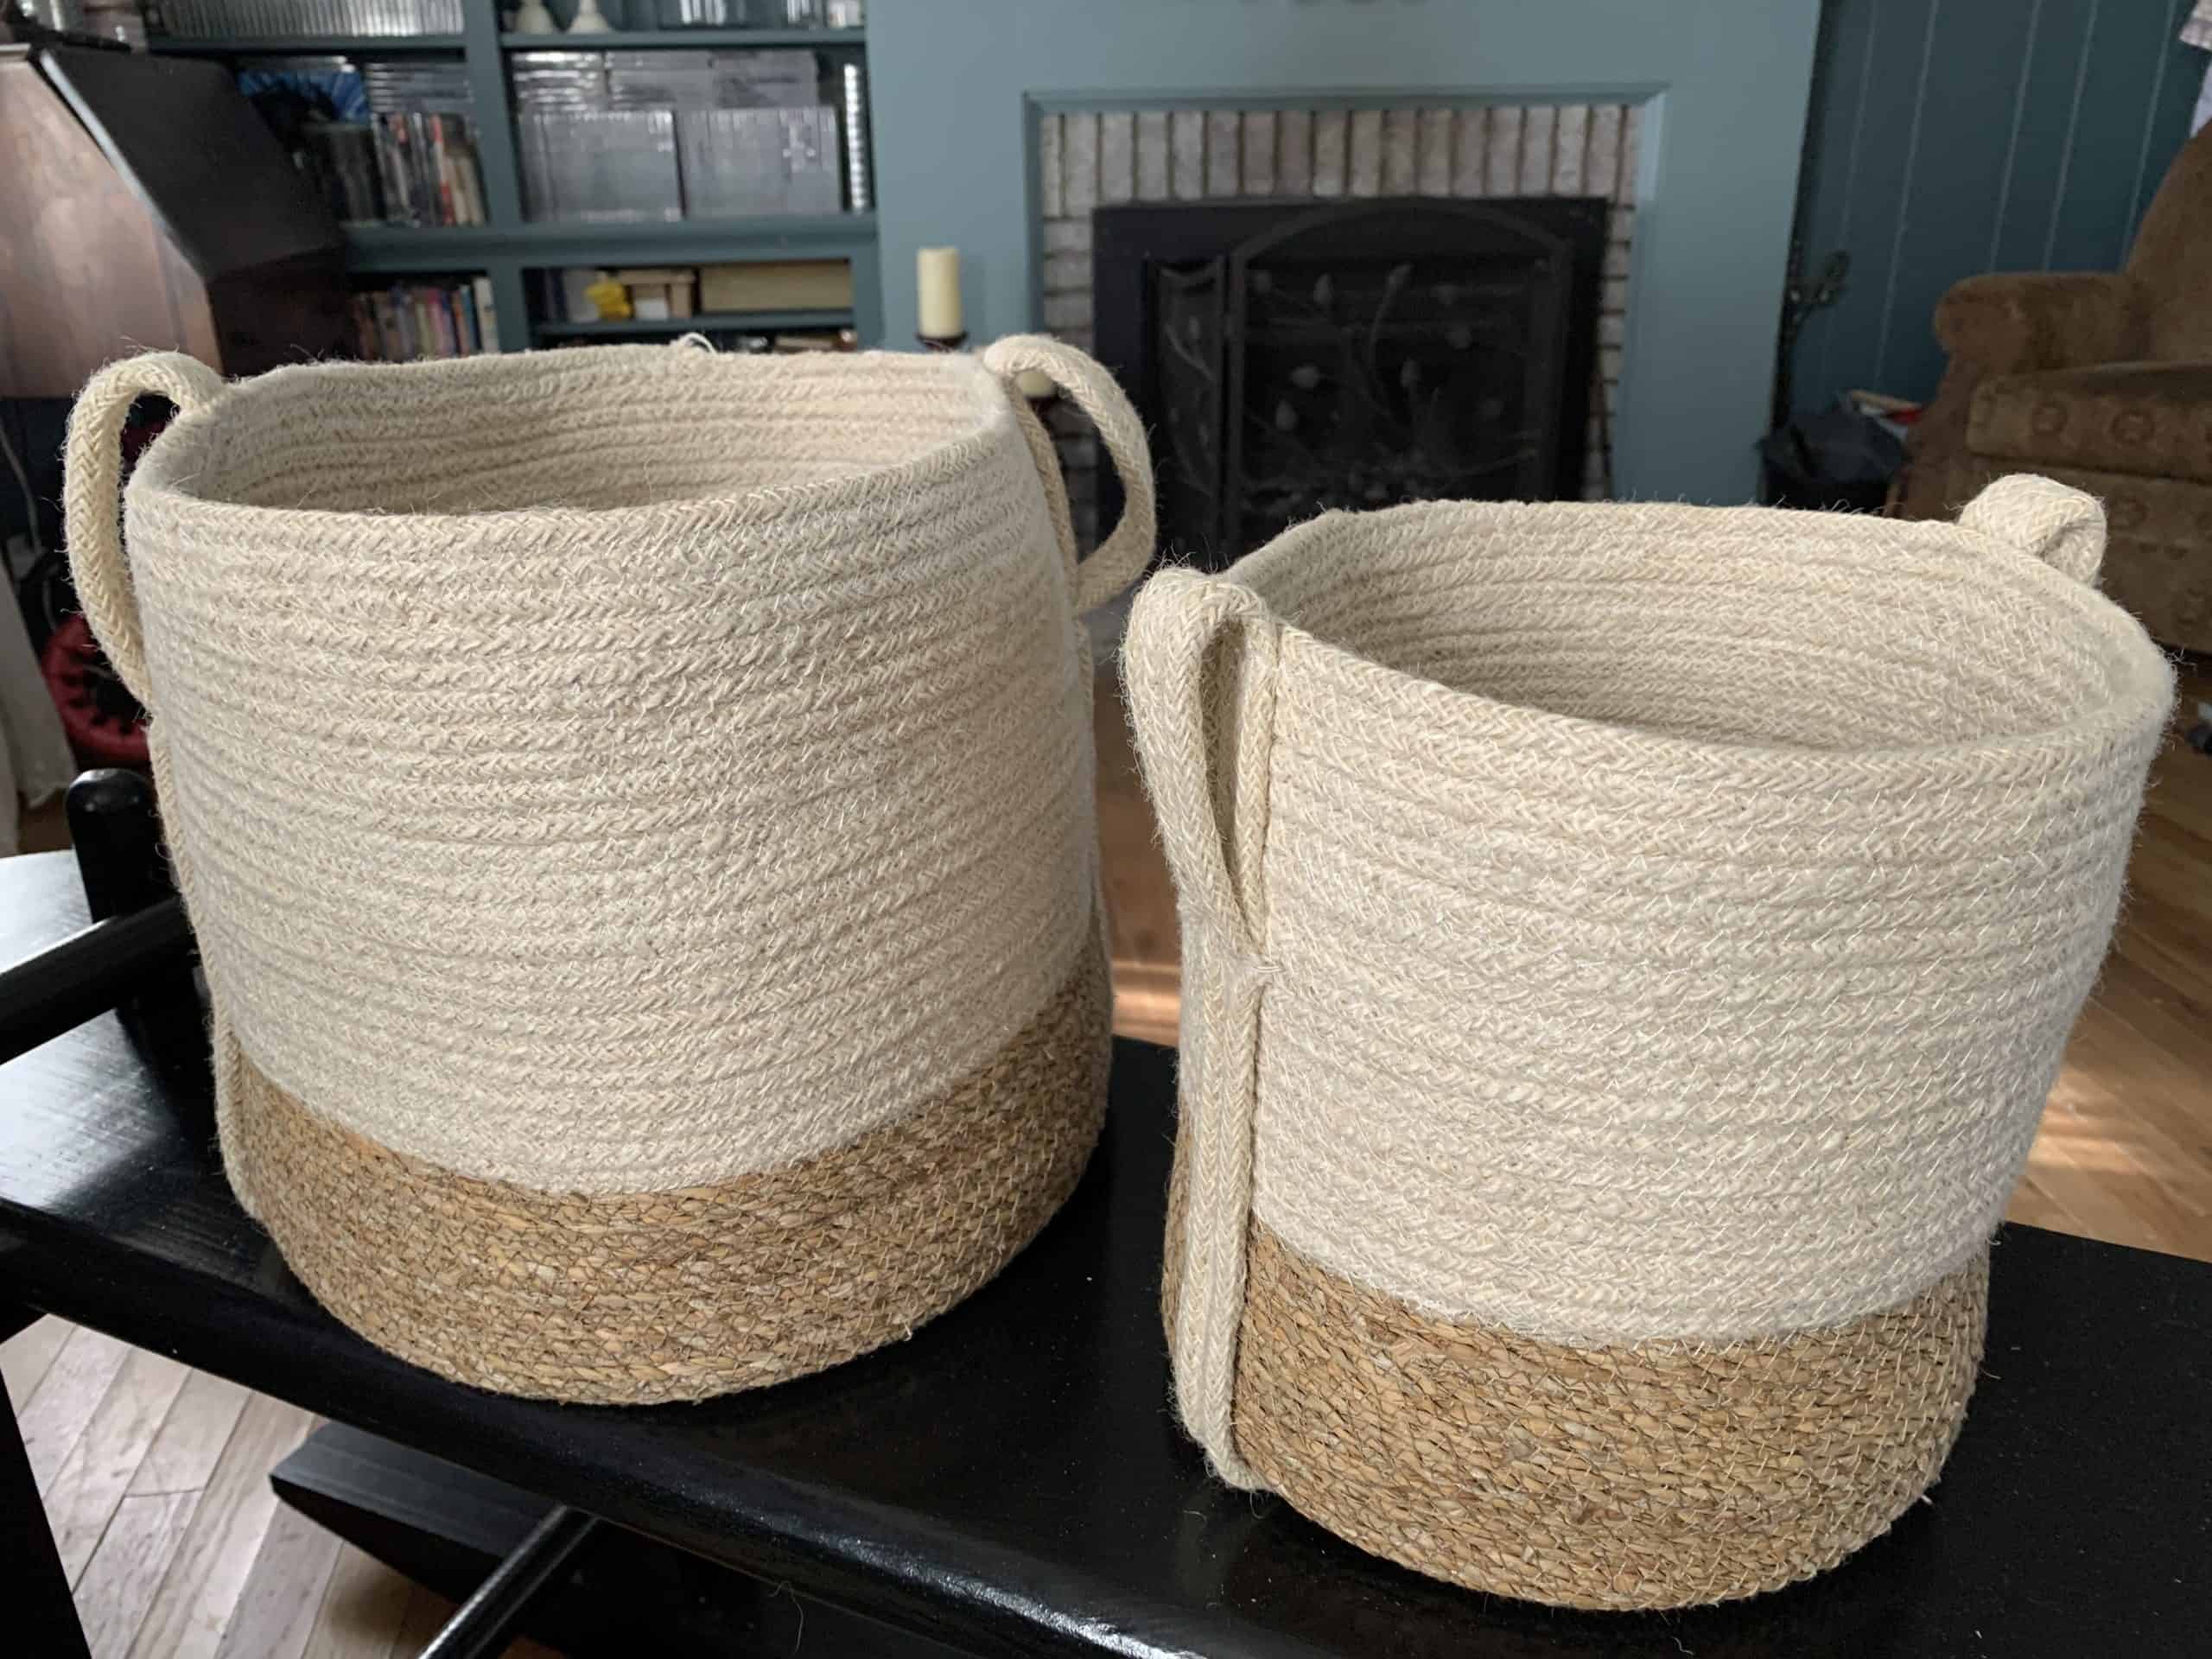 products to make your life easier in 2022 - hand woven baskets